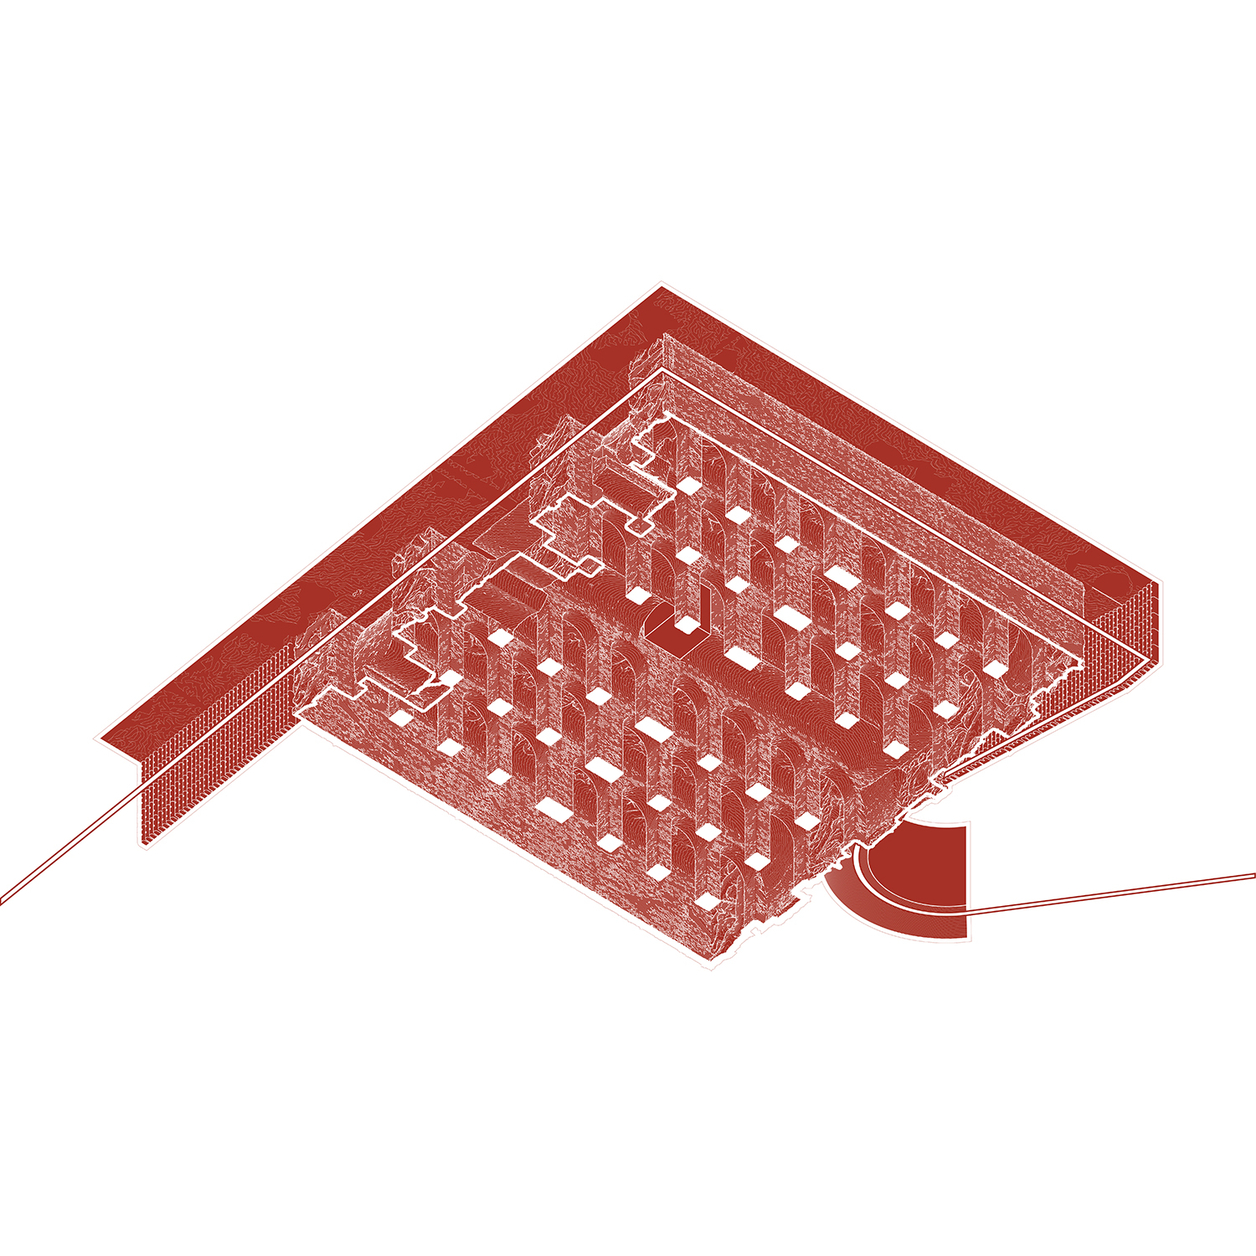 Rendering in red of the base of a building